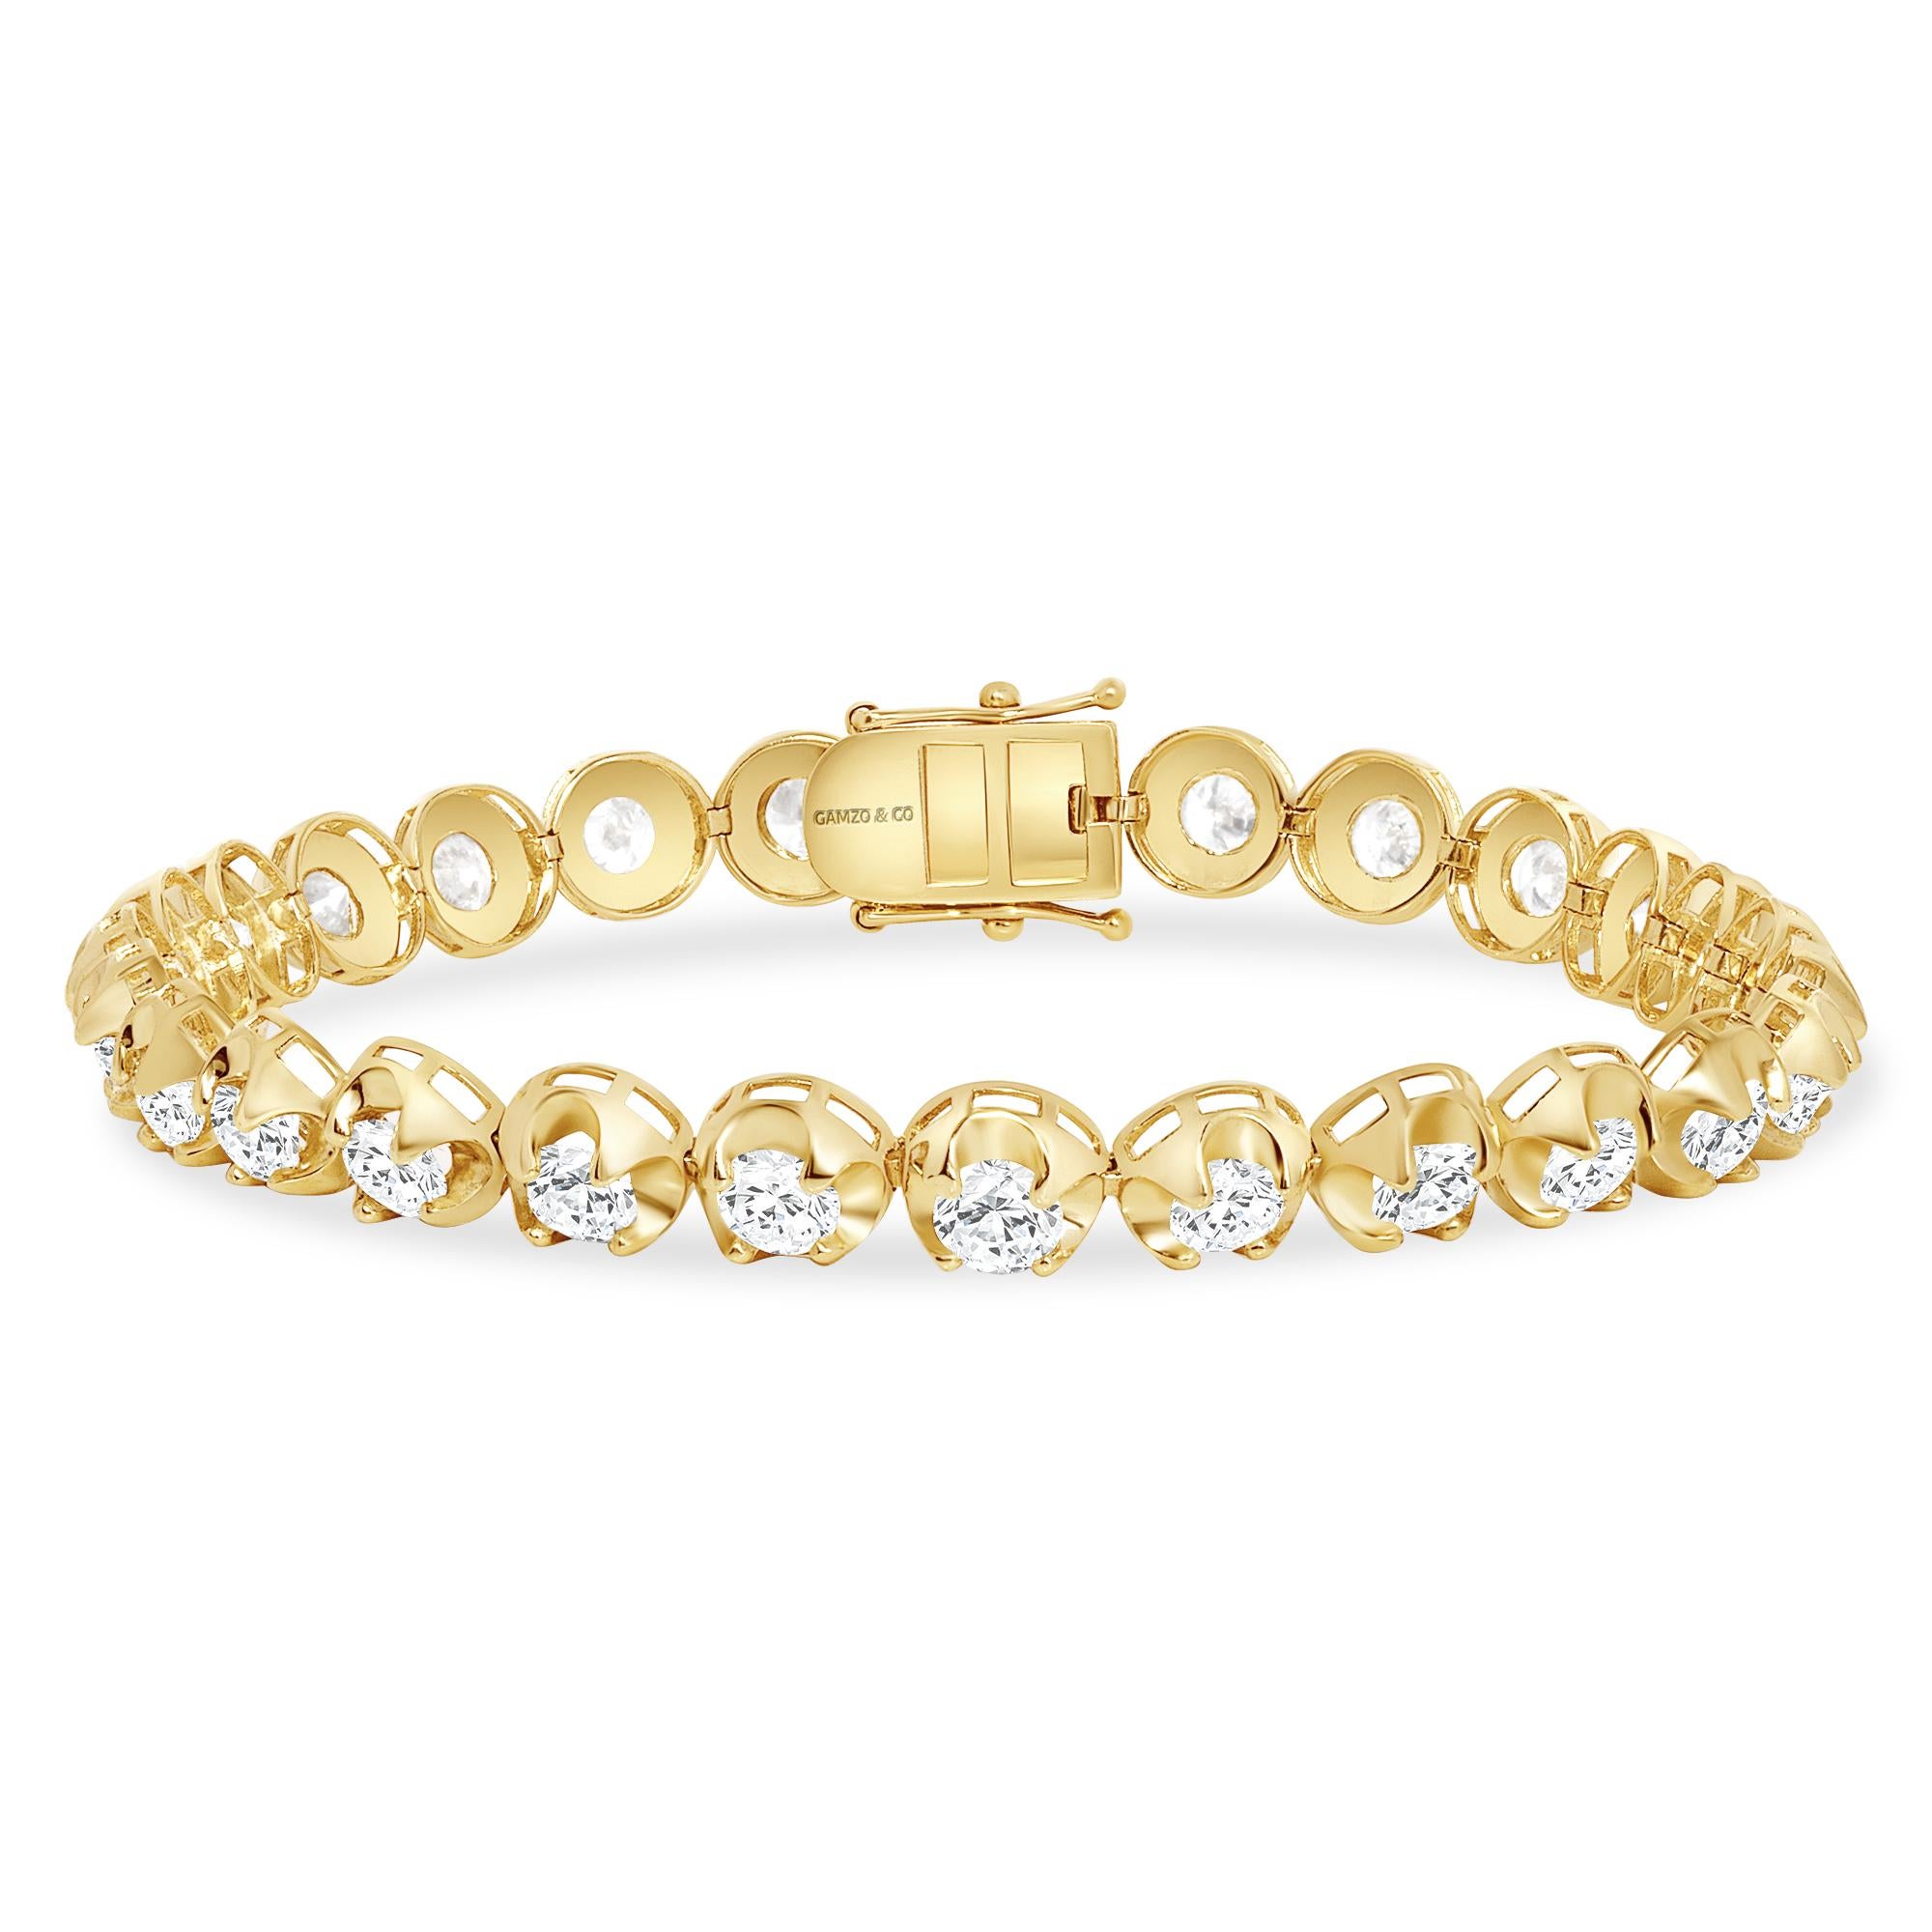 These beautiful round diamonds dance around your wrist as they absorb light and attention.
Metal: 14k Gold
Diamond Cut: Round
Diamond Total Carats: 7ct
Diamond Clarity: VS
Diamond Color: F
Color: Yellow Gold
Bracelet Length: 7 Inches 
Included with